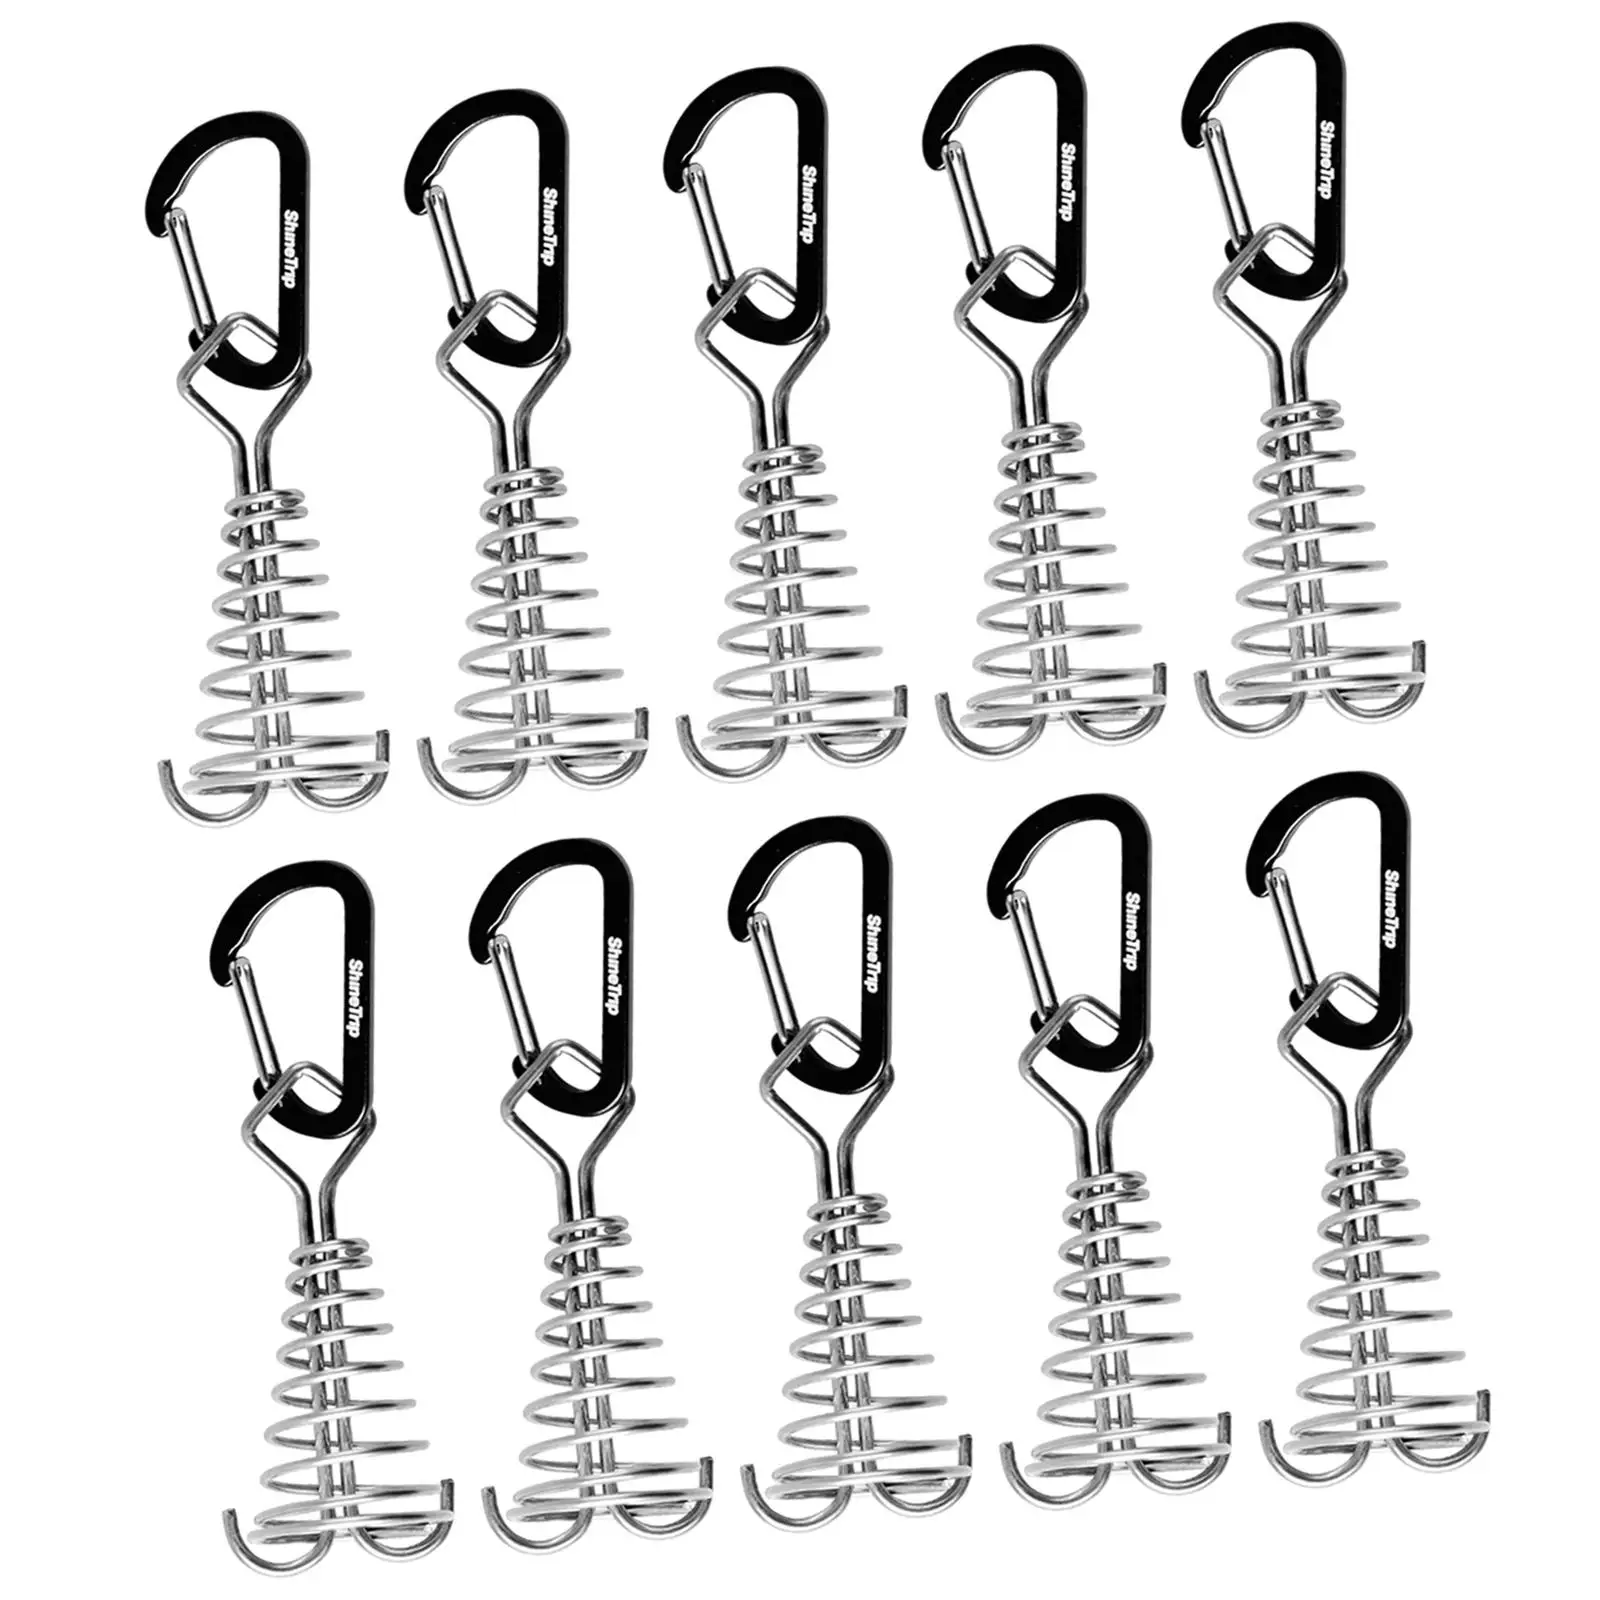 10 Pieces Deck Anchor Pegs with Spring Buckle, Portable Windproof Tent Rope Tightener for Outdoor Hiking